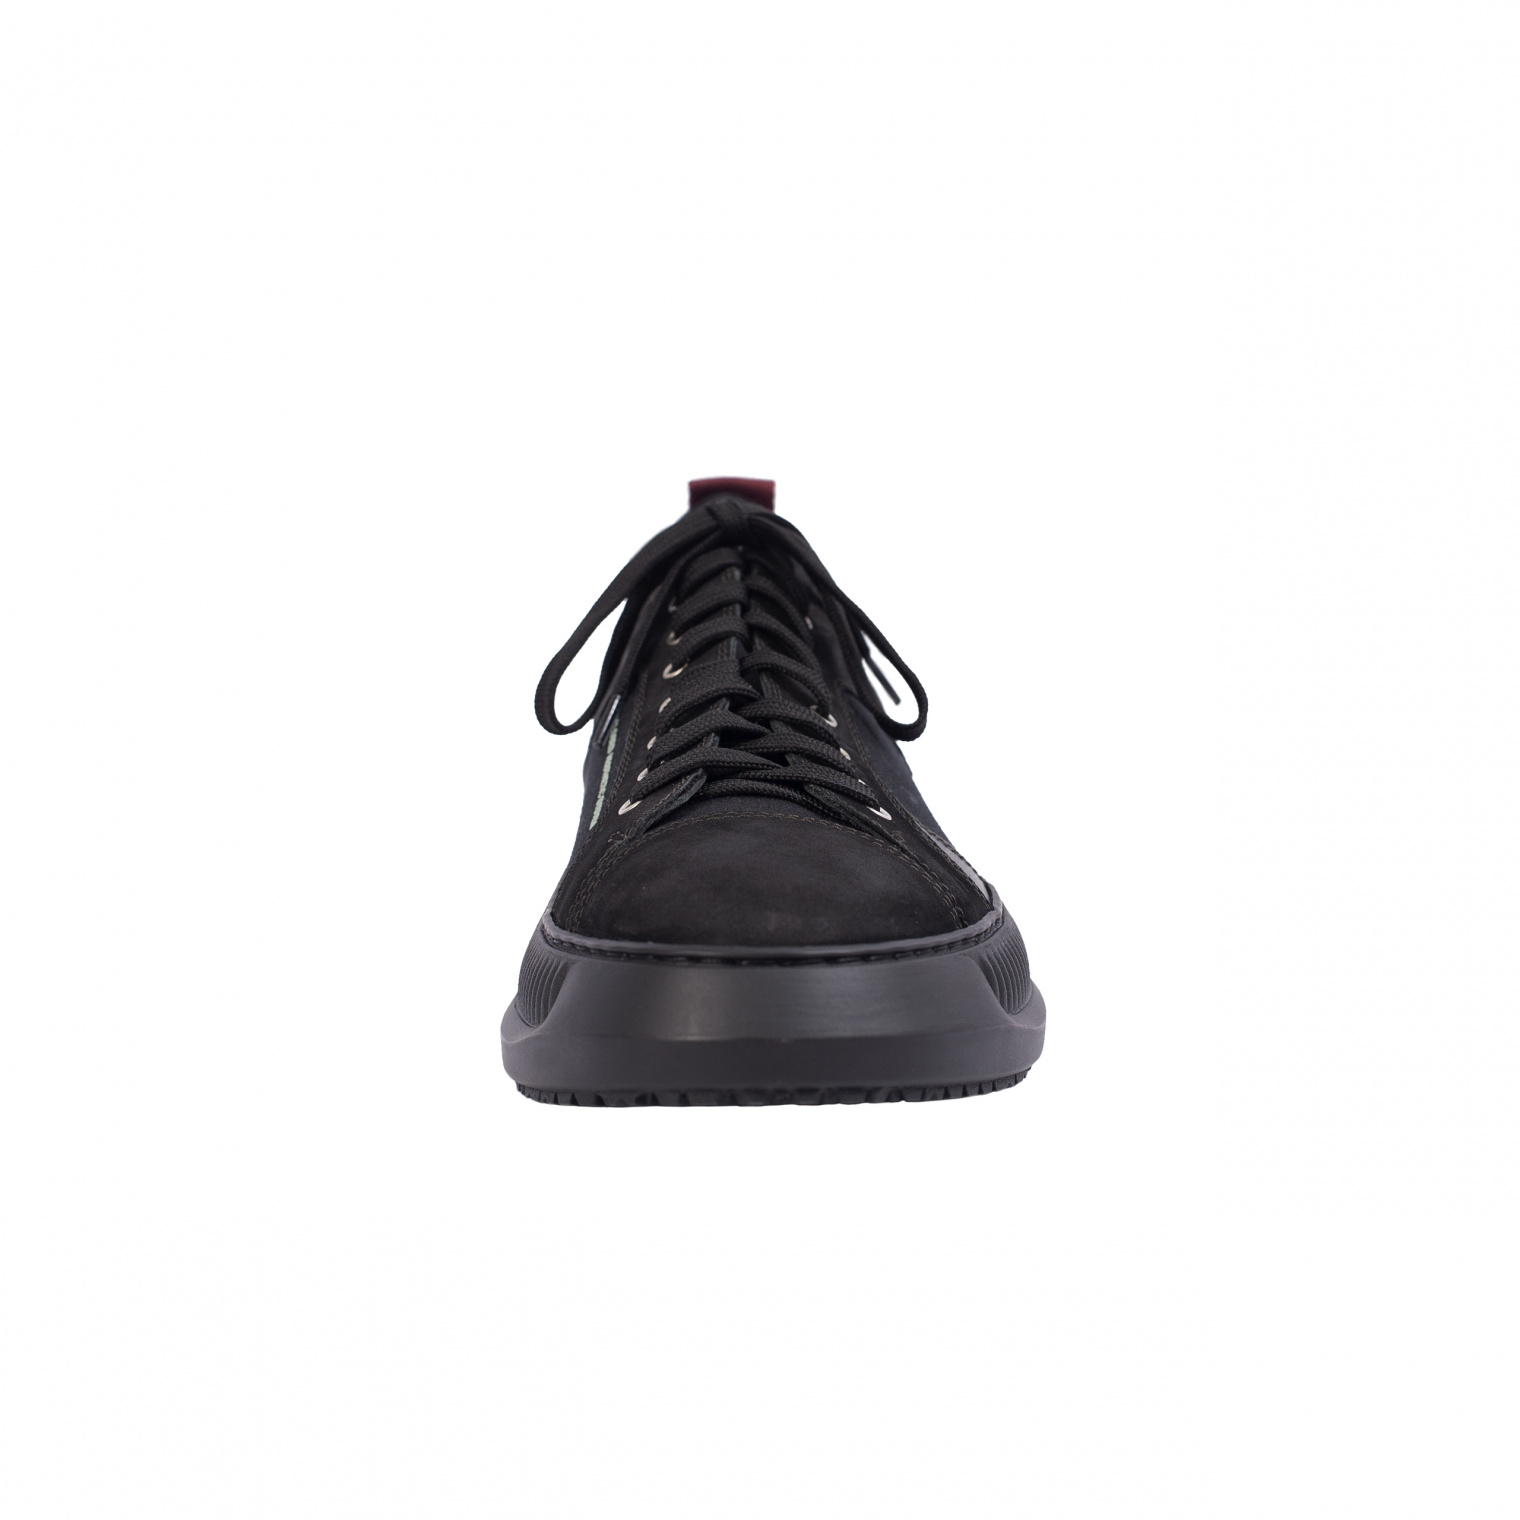 OAMC Rugged Sole Sneakers